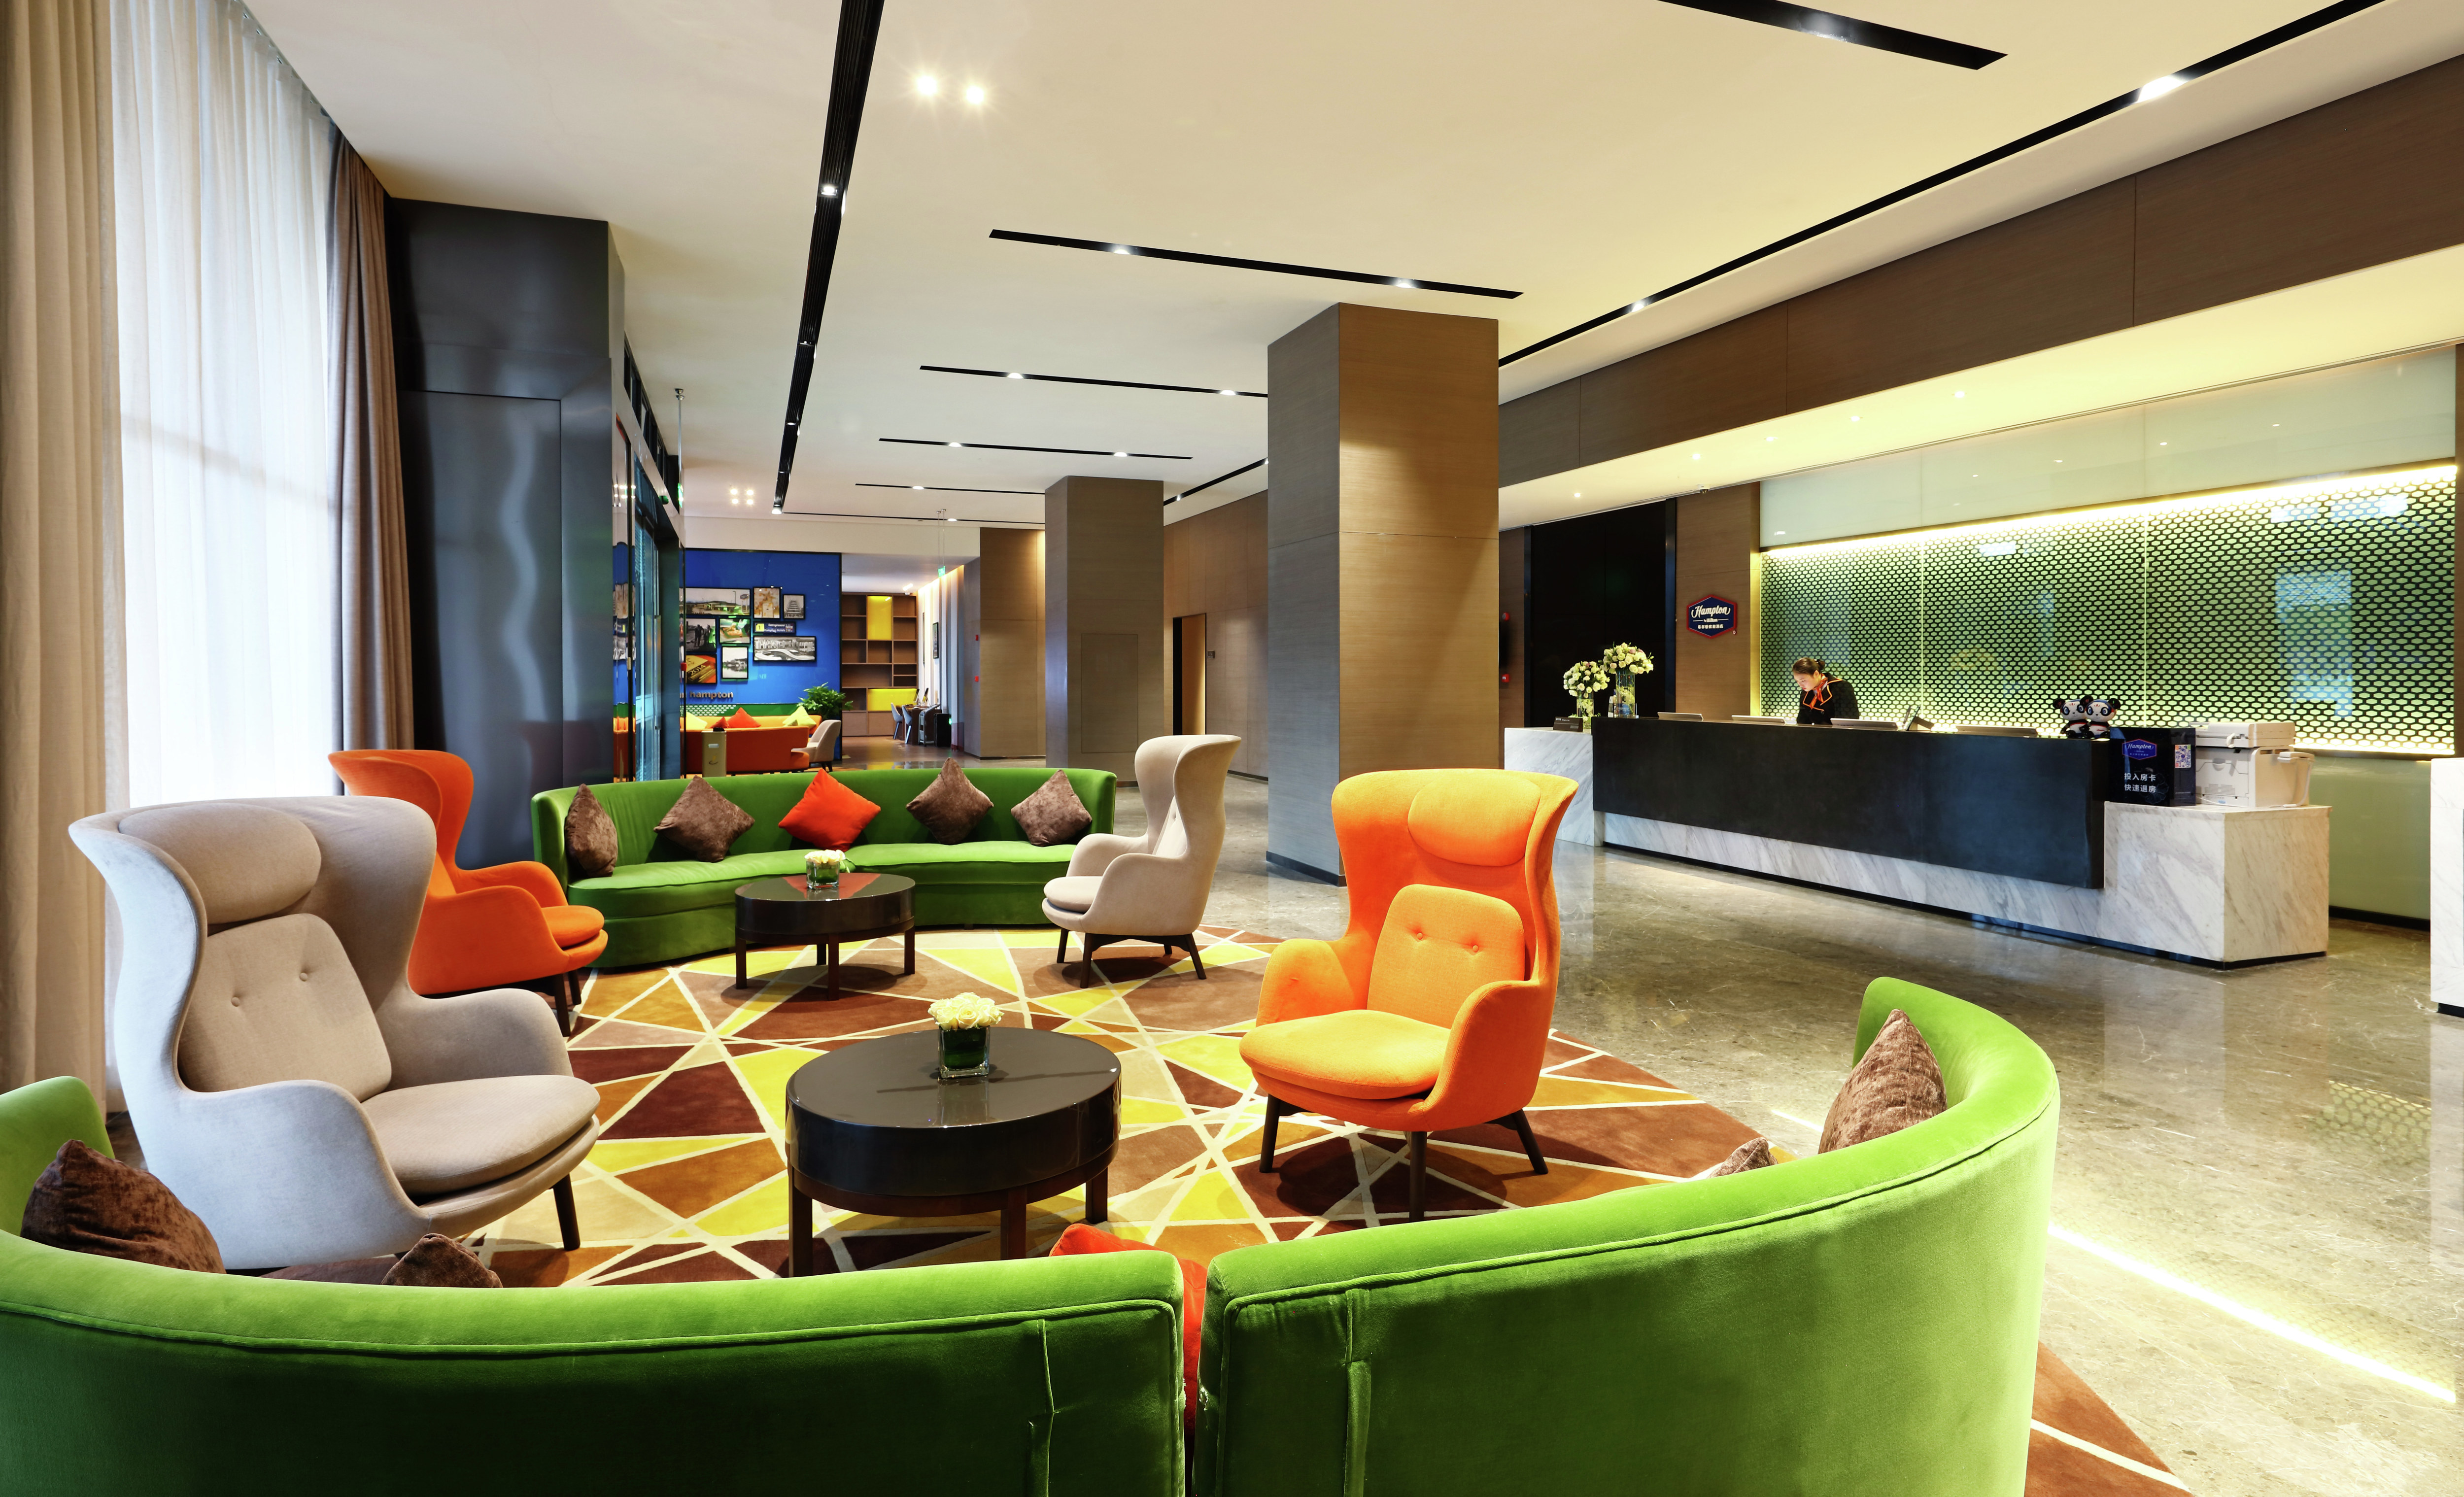 Lobby and Lounge Area with Modern Furnishings 